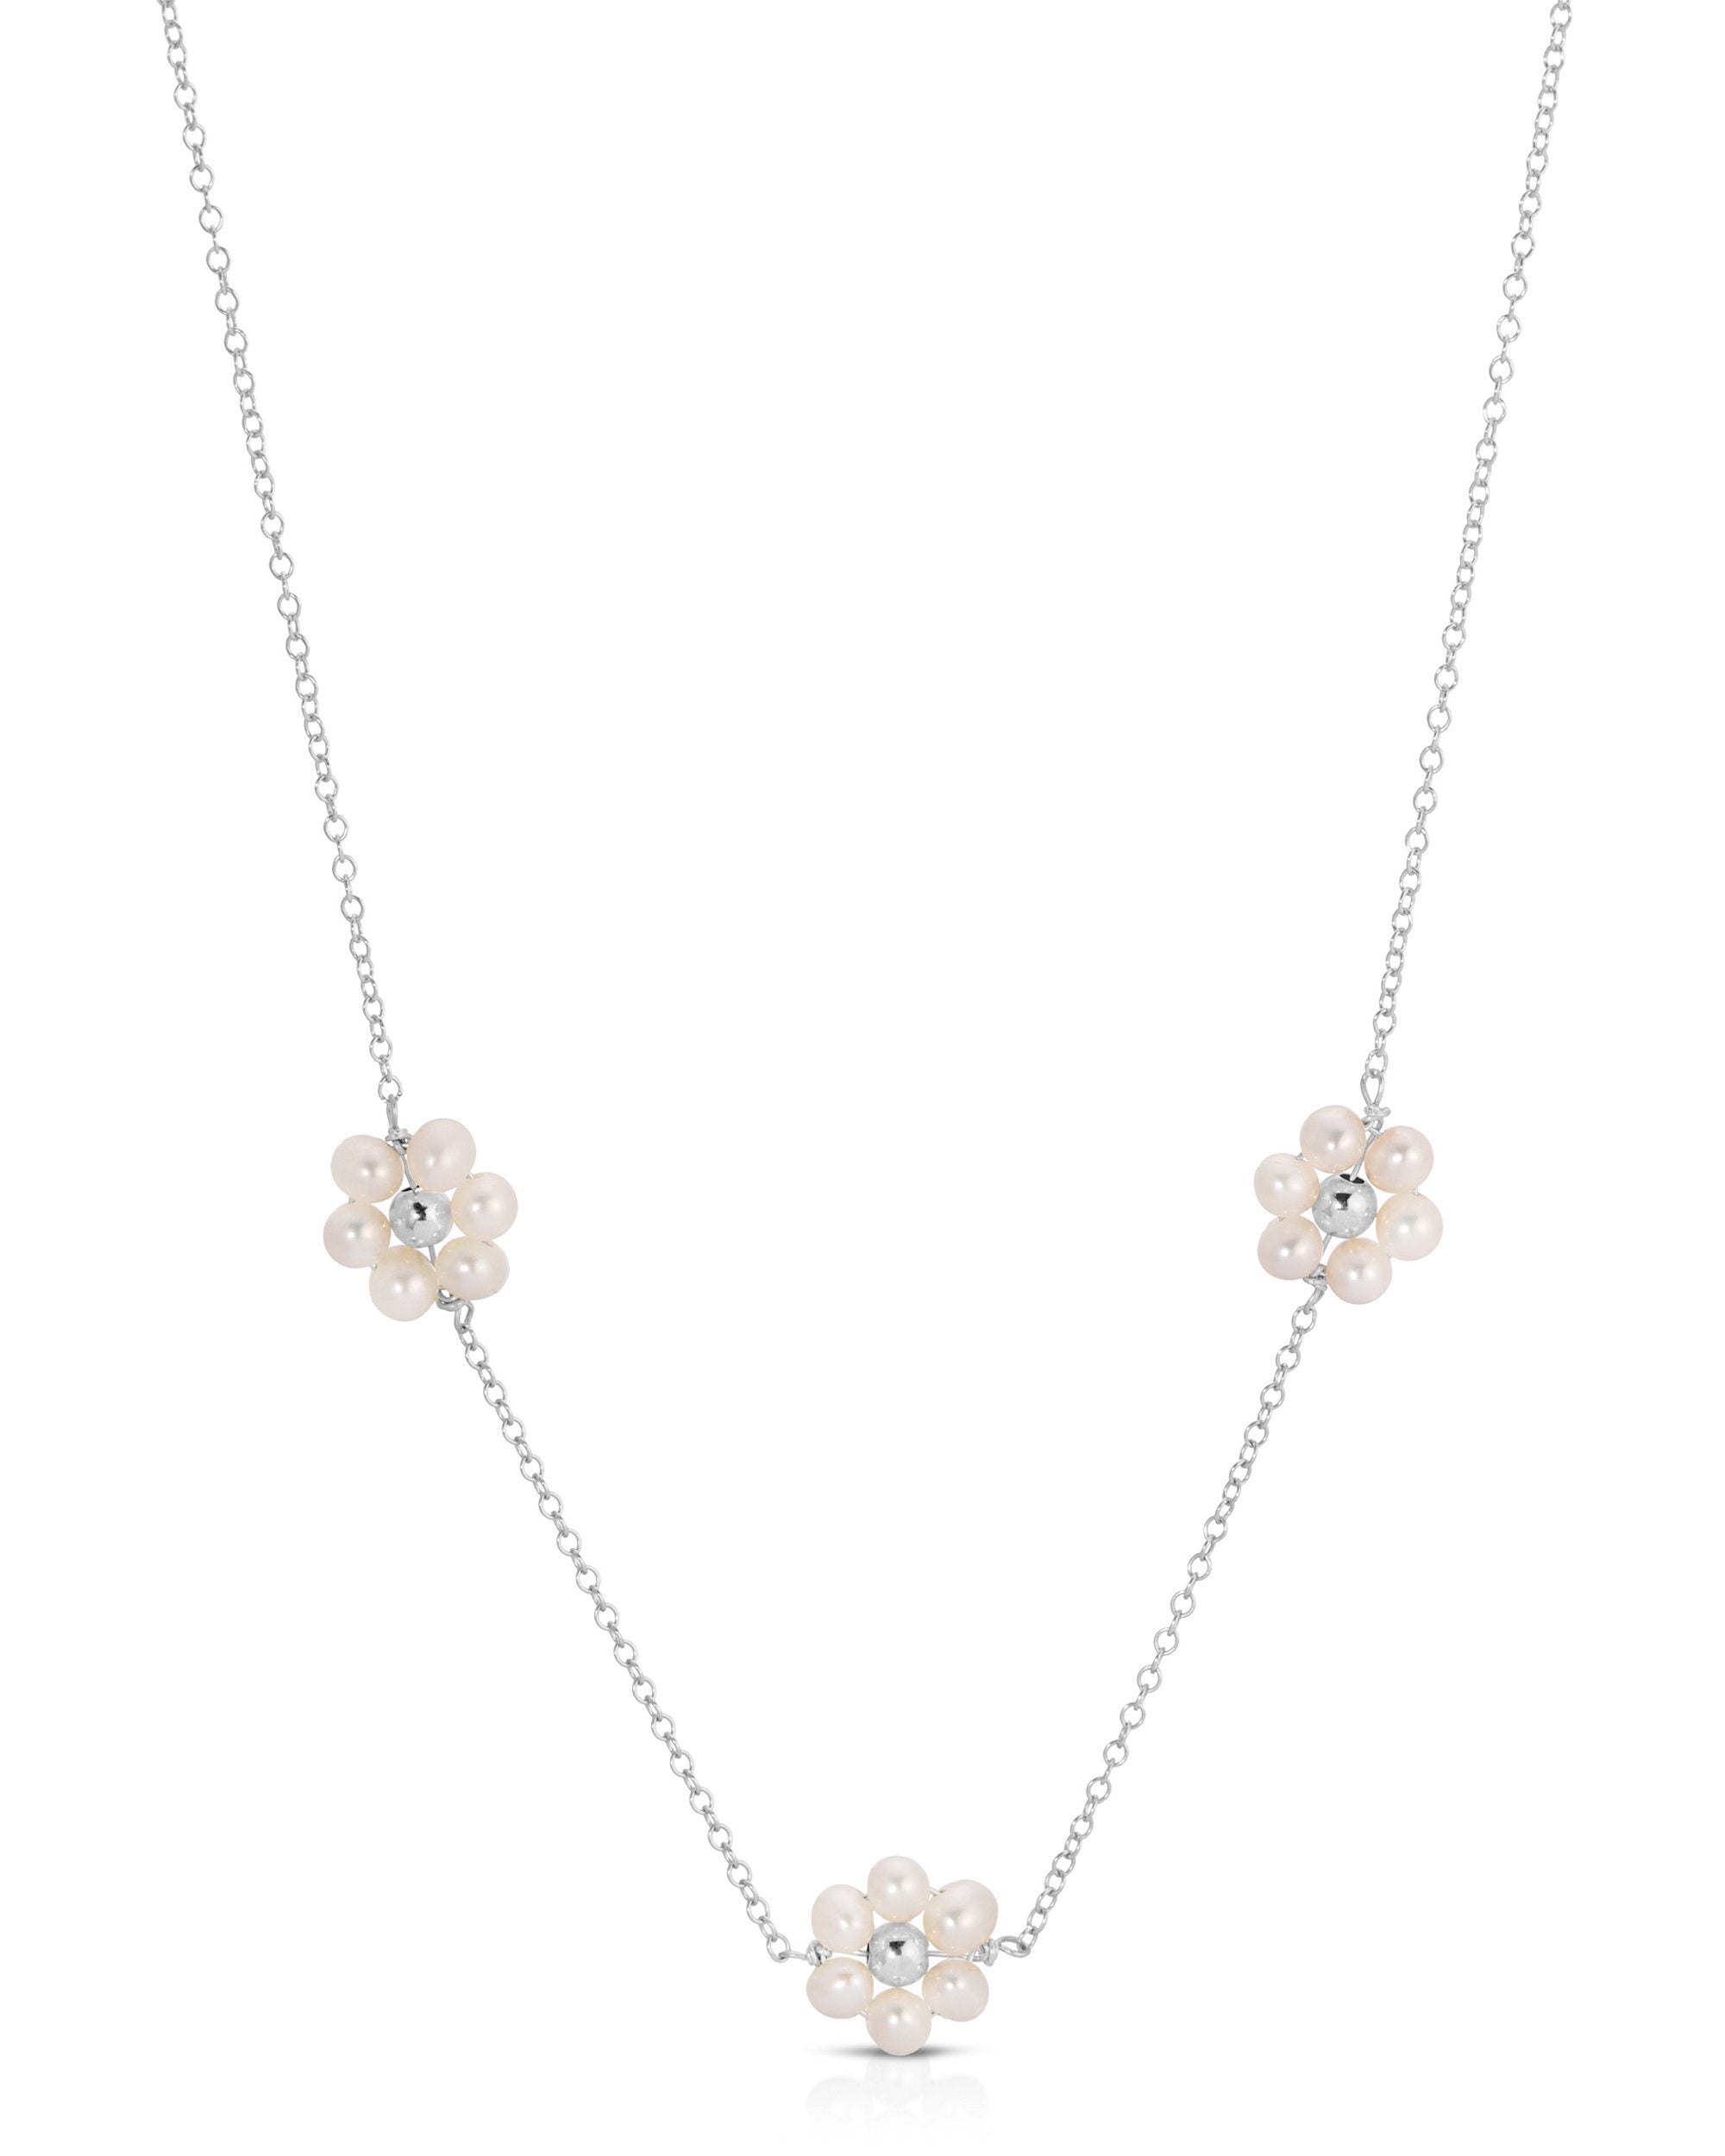 Fiores Choker Necklace by KOZAKH. A 13.5 to 15.5 inch adjustable length choker necklace, crafted in Sterling Silver, featuring 3mm Freshwater Pearls in form of daisies.